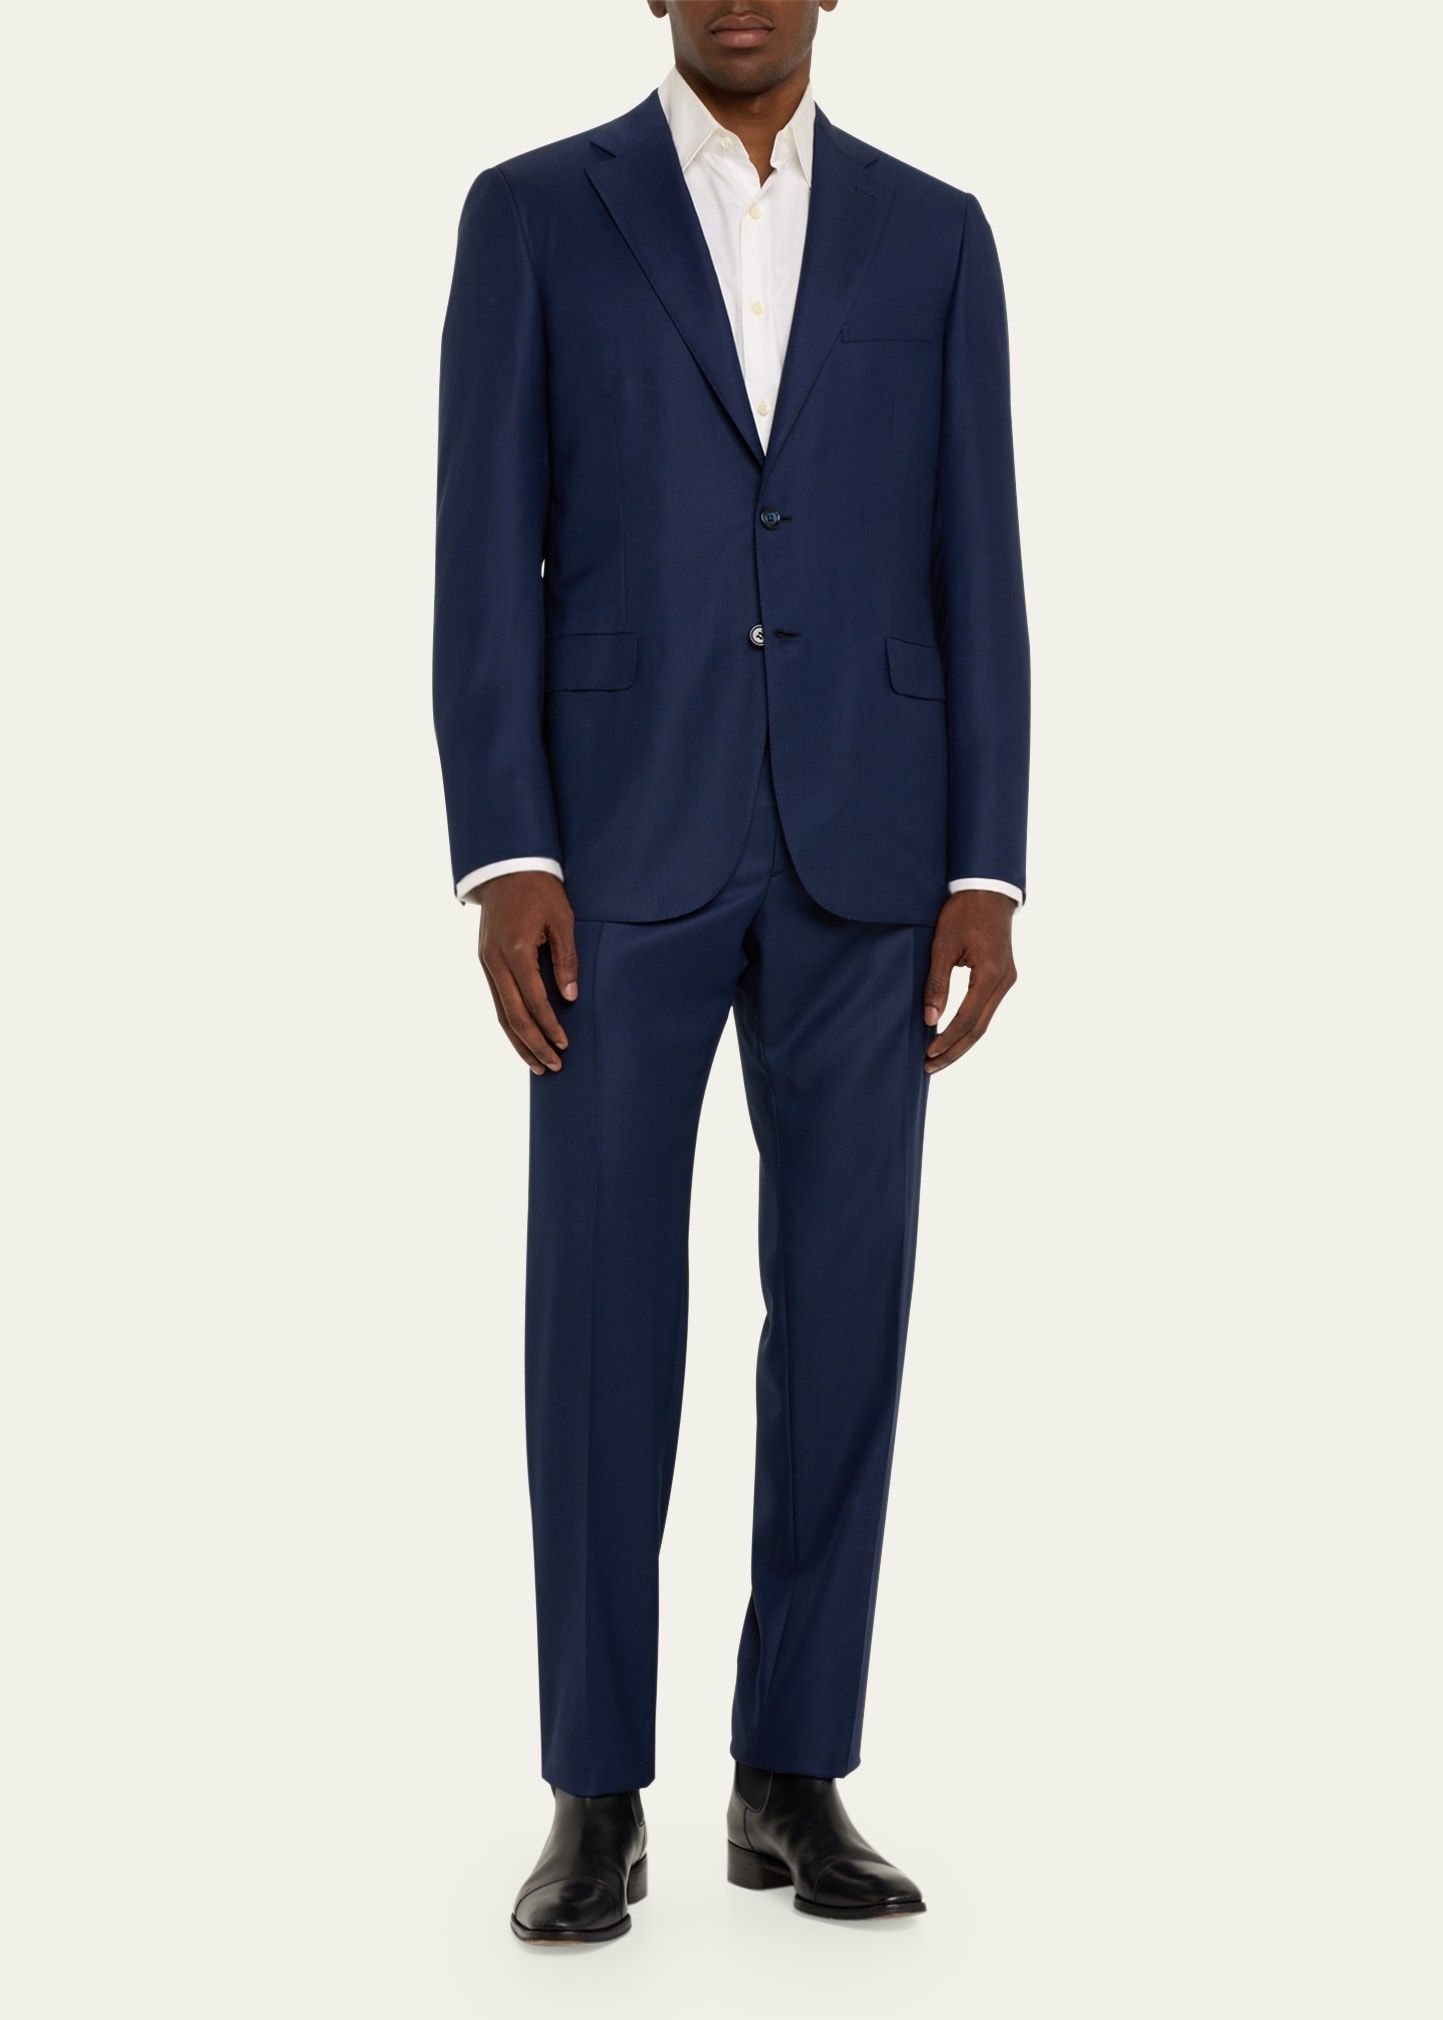 Men's Textured Solid Two-Piece Suit, Bright Navy - 2